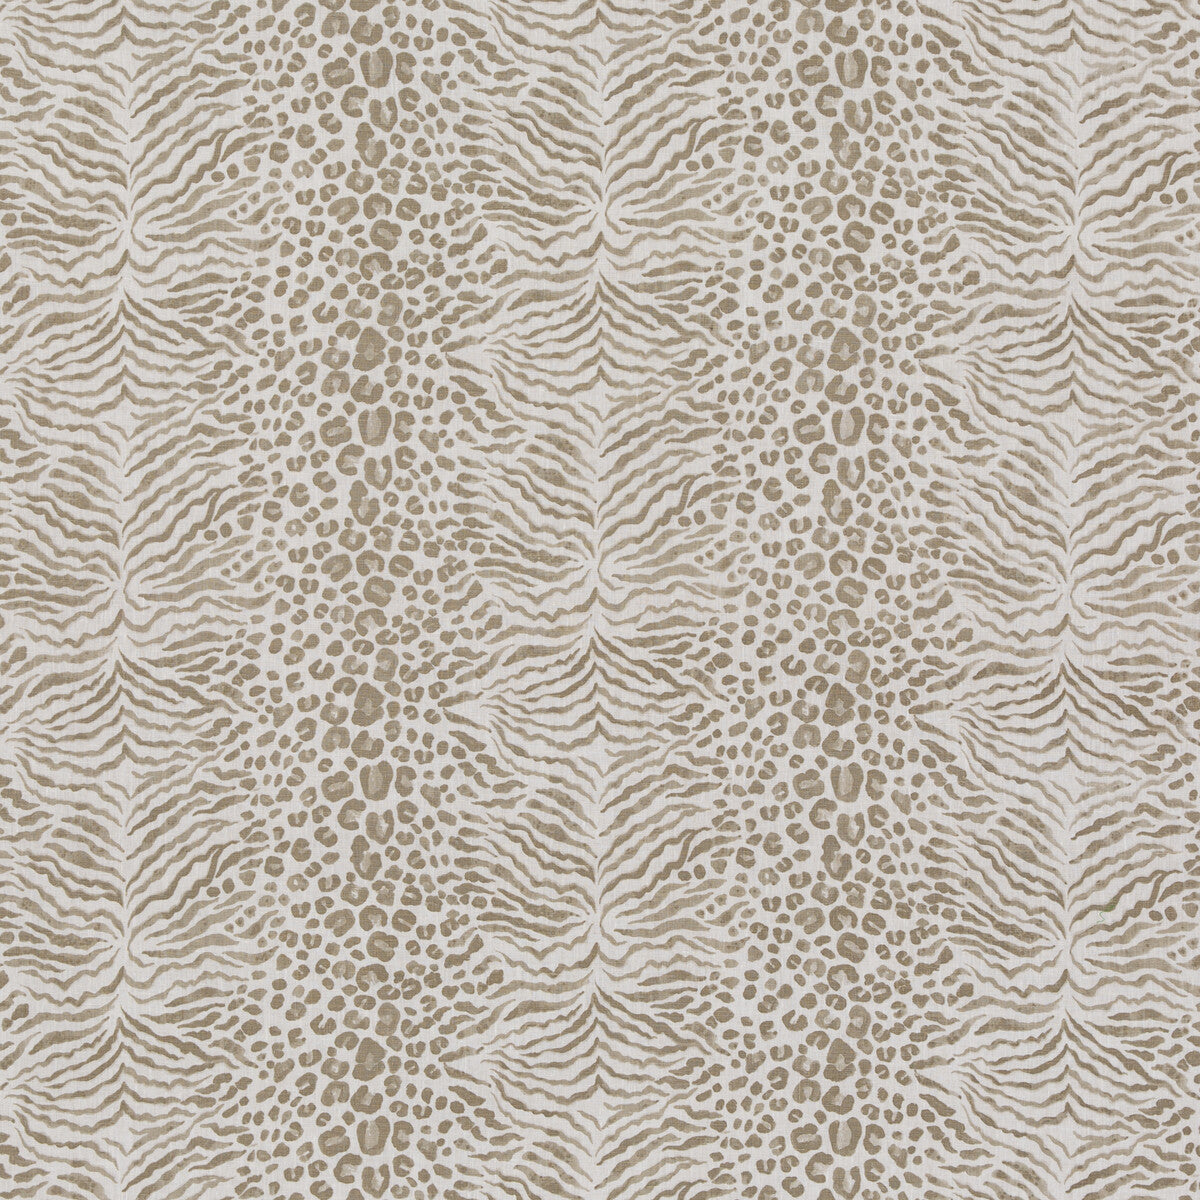 Chatto fabric in bronze color - pattern BP10952.850.0 - by G P &amp; J Baker in the Ashmore collection